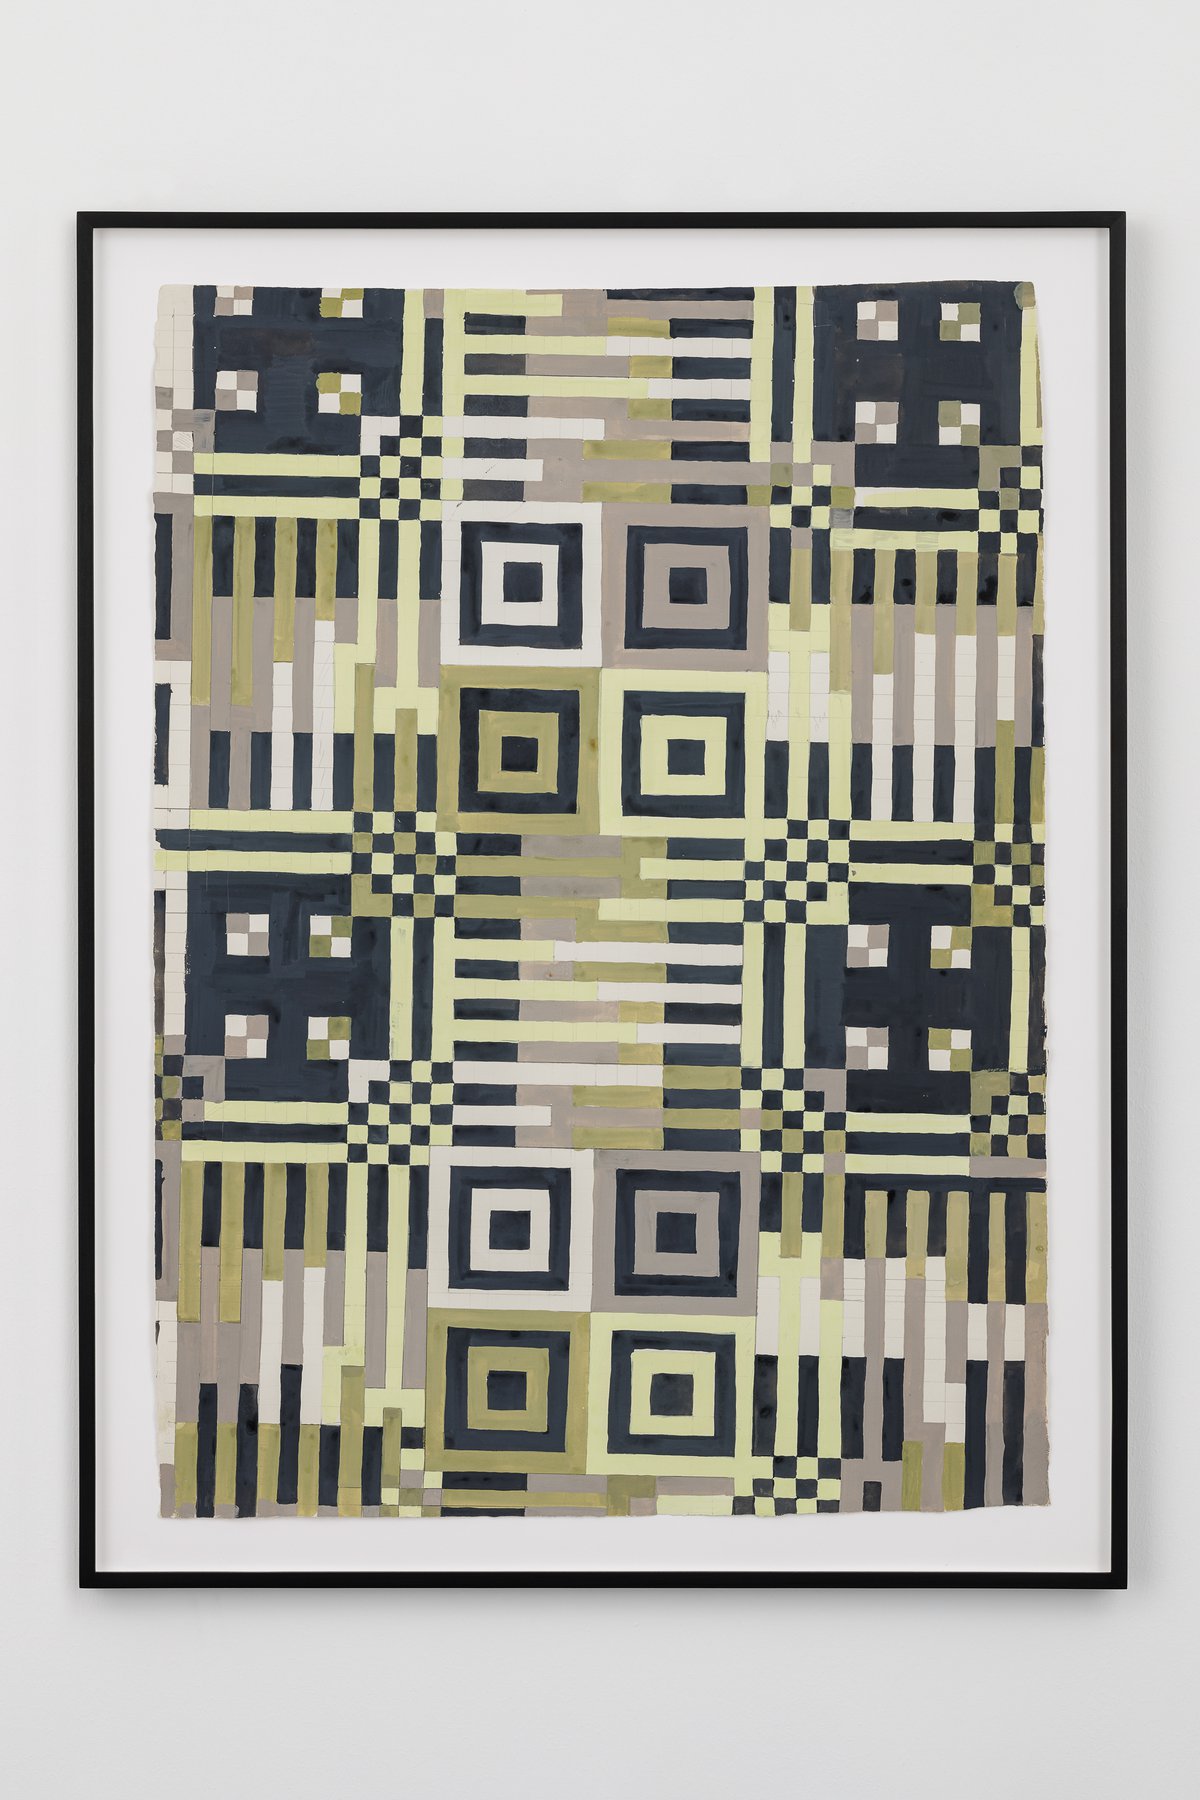 Anna AndreevaGeometric Pattern “Formulas” (Q-R Code), 1978Ink and gouache on perforated paper62 x 86 cm